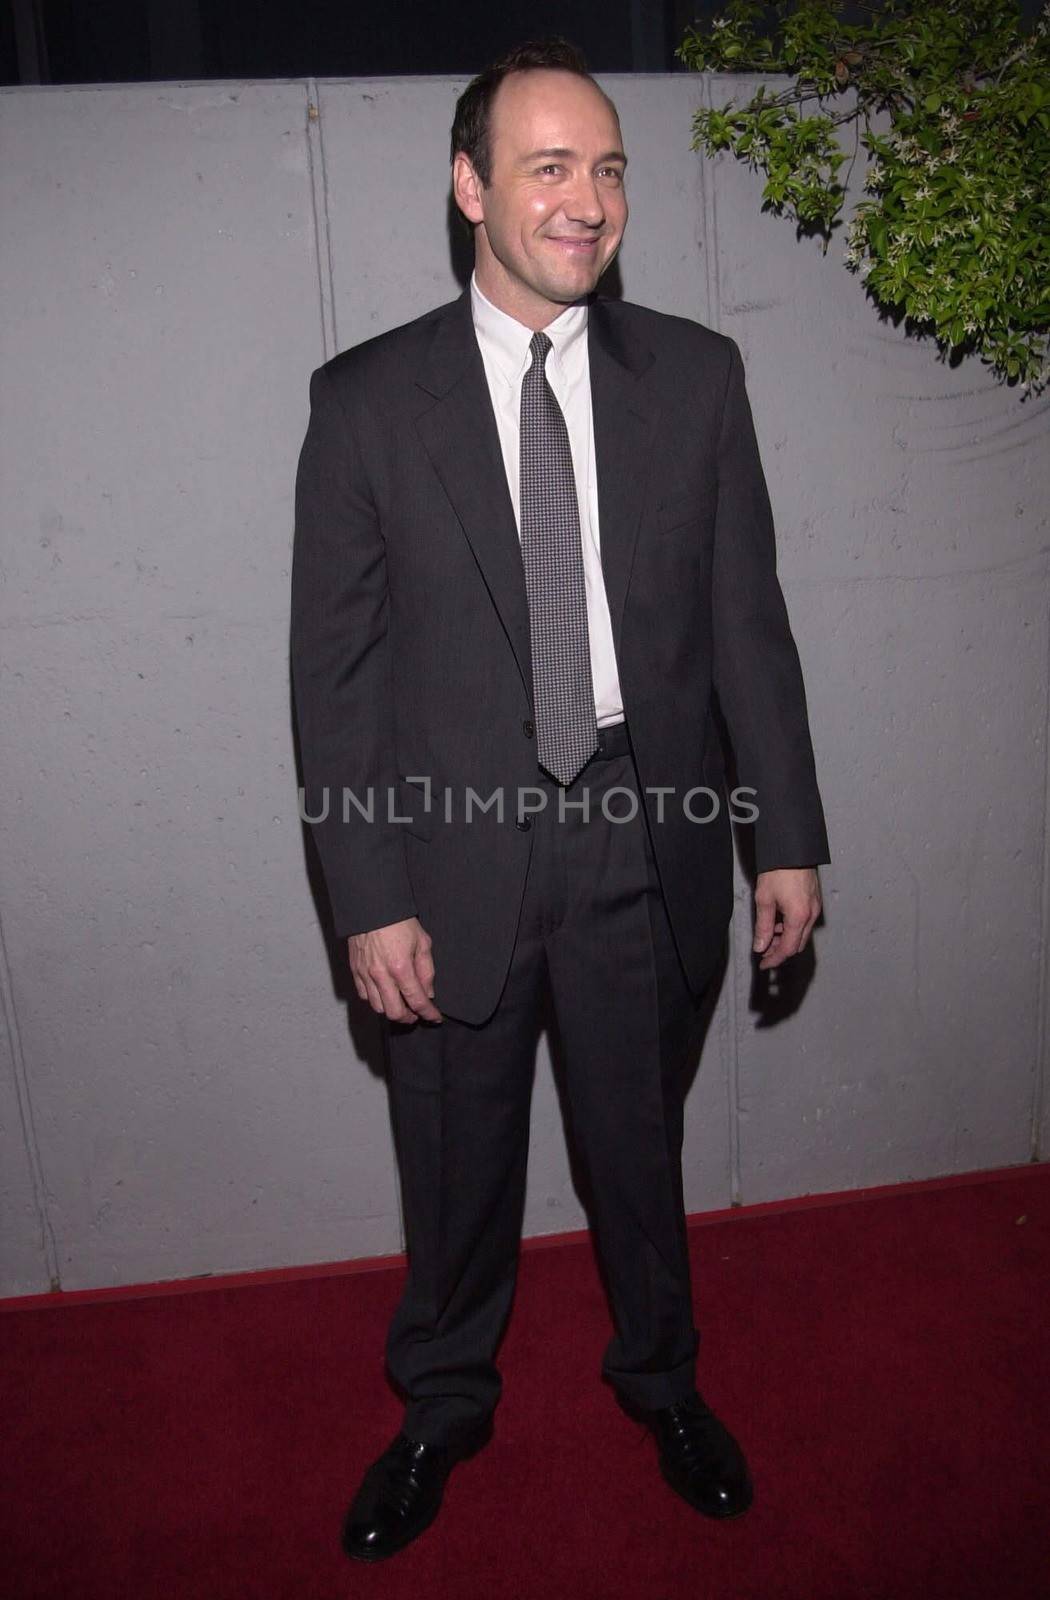 Kevin Spacey at the premiere of Lions Gate Film's "THE BIG KAHUNA" in Hollywood, 04-26-00